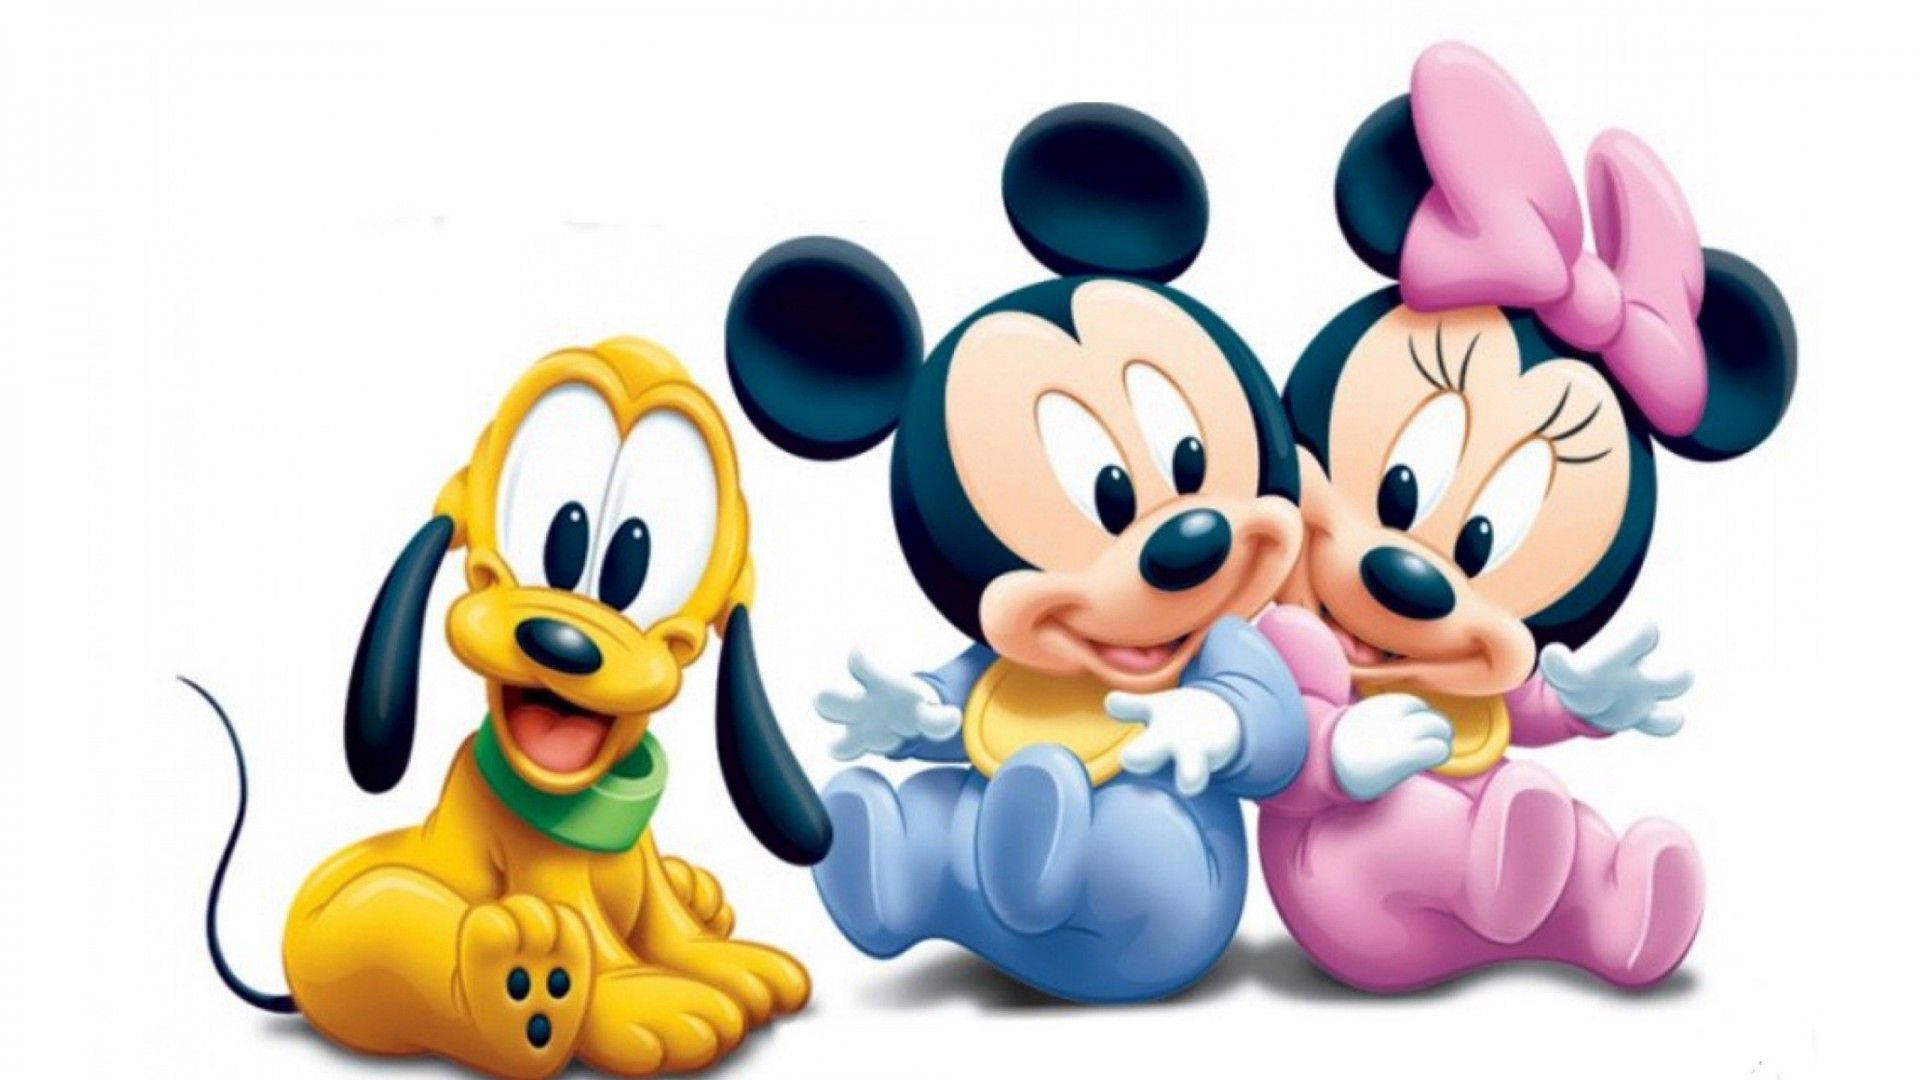 Baby Minnie Mouse And Friends Background